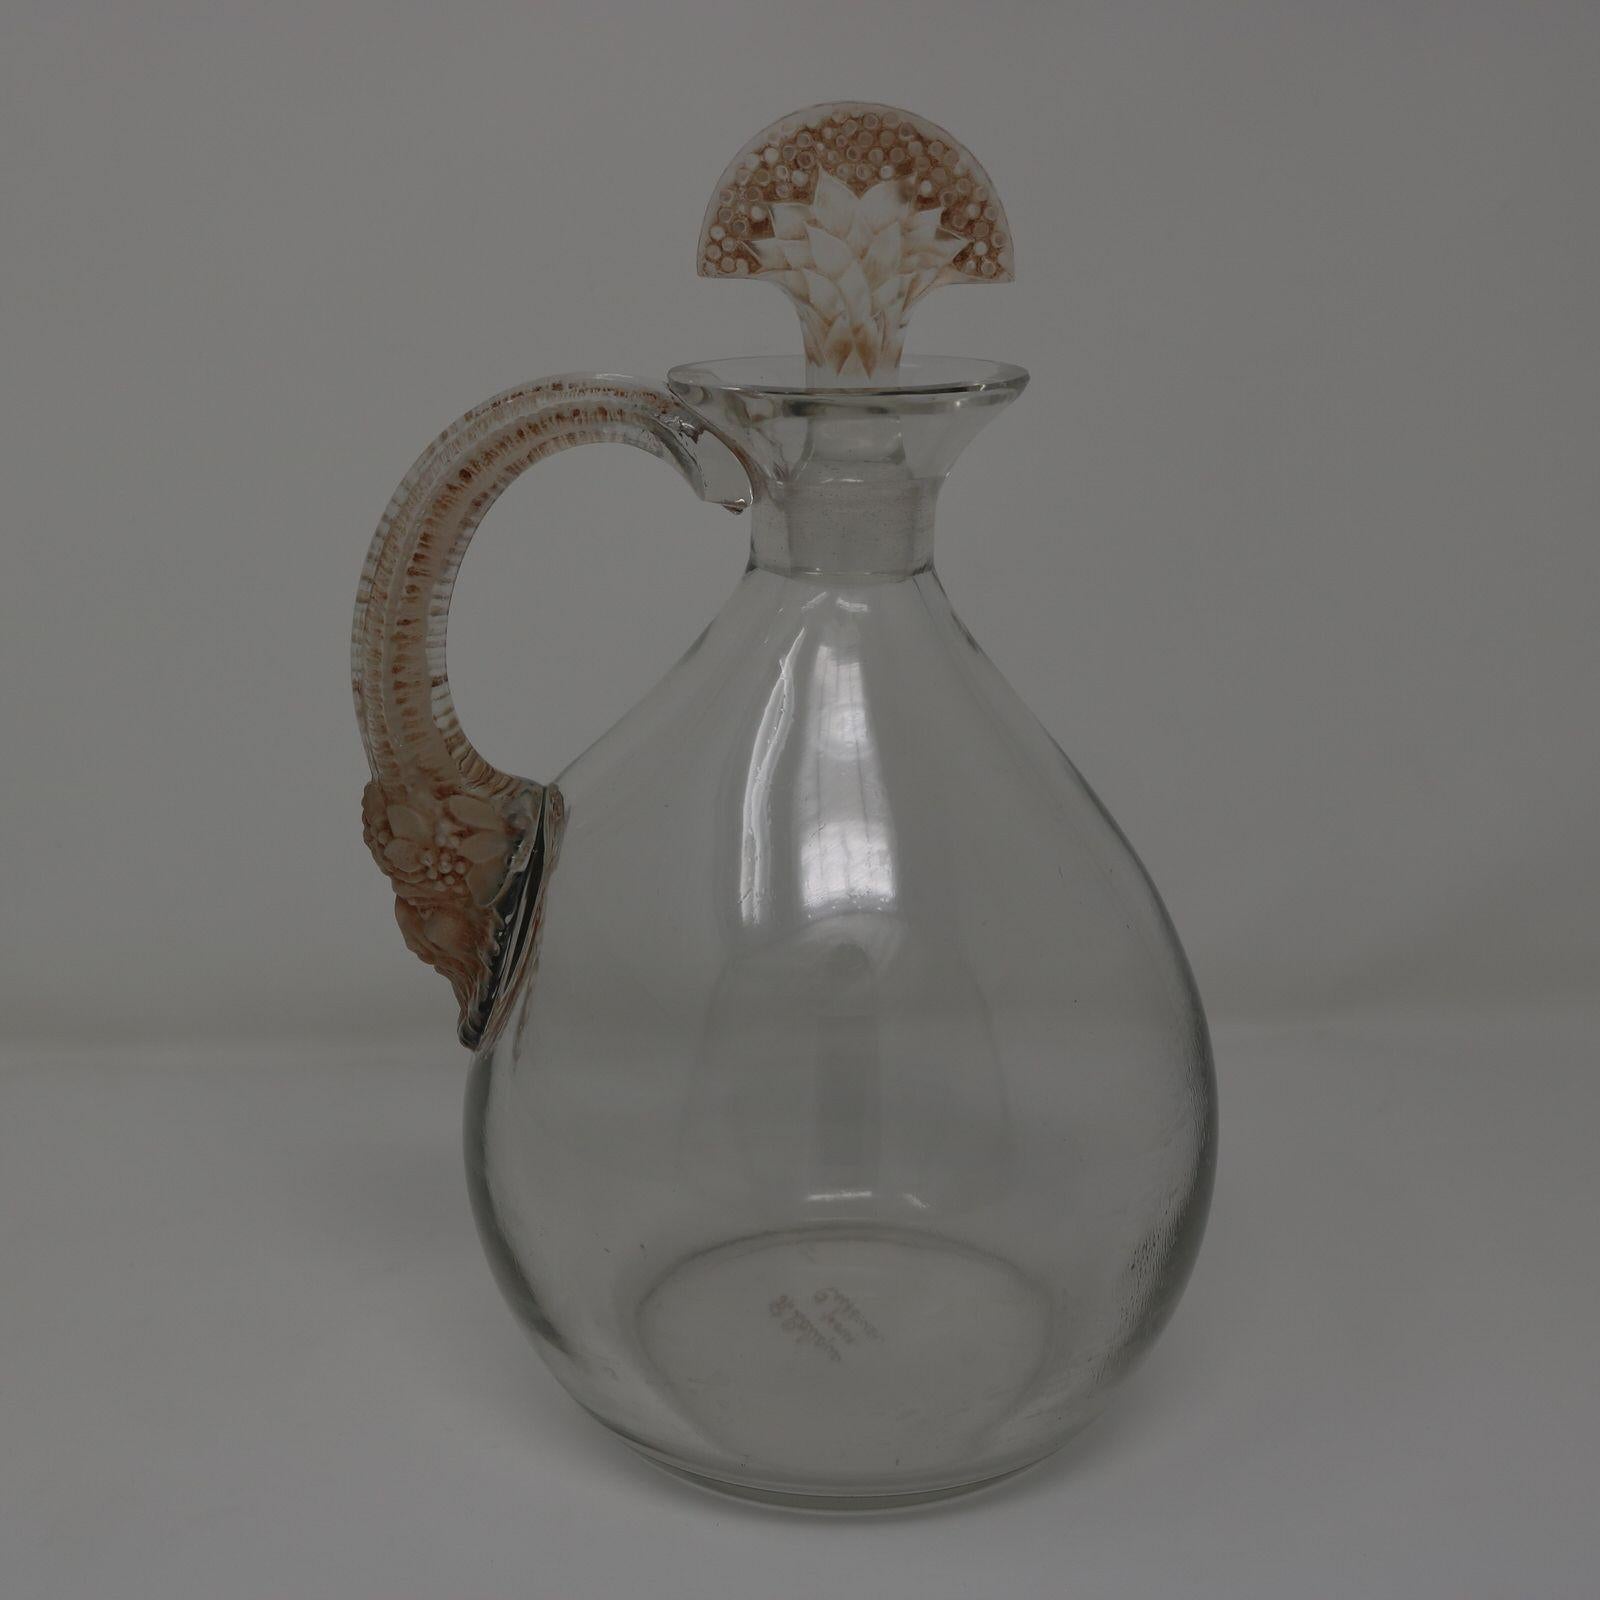 Rene Lalique clear glass 'Satyre' decanter, with brown patina details. Has a bulbous shaped bottle, with a handle on one side. The base of the handle is in the form of a satyr head with long horns curving up to form the handle. The glass stopper has